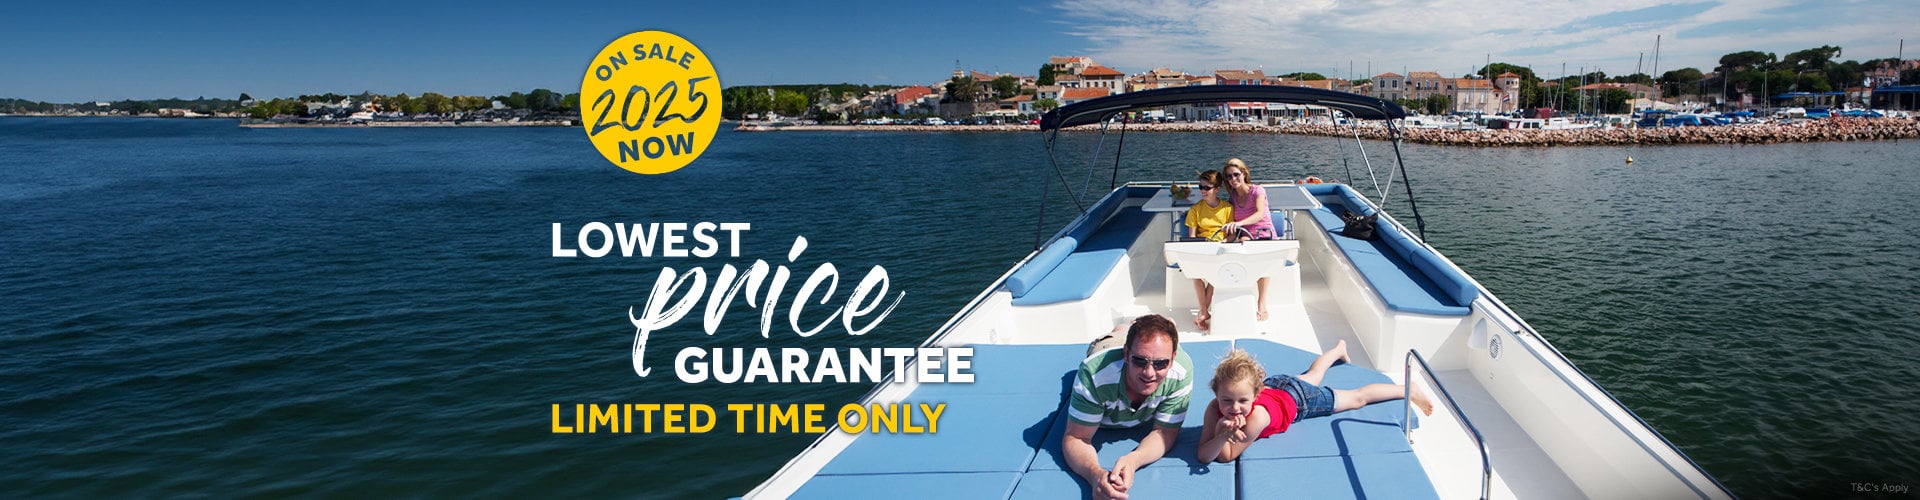 Le Boat - Lowest Price Guarantee on 2025 holidays